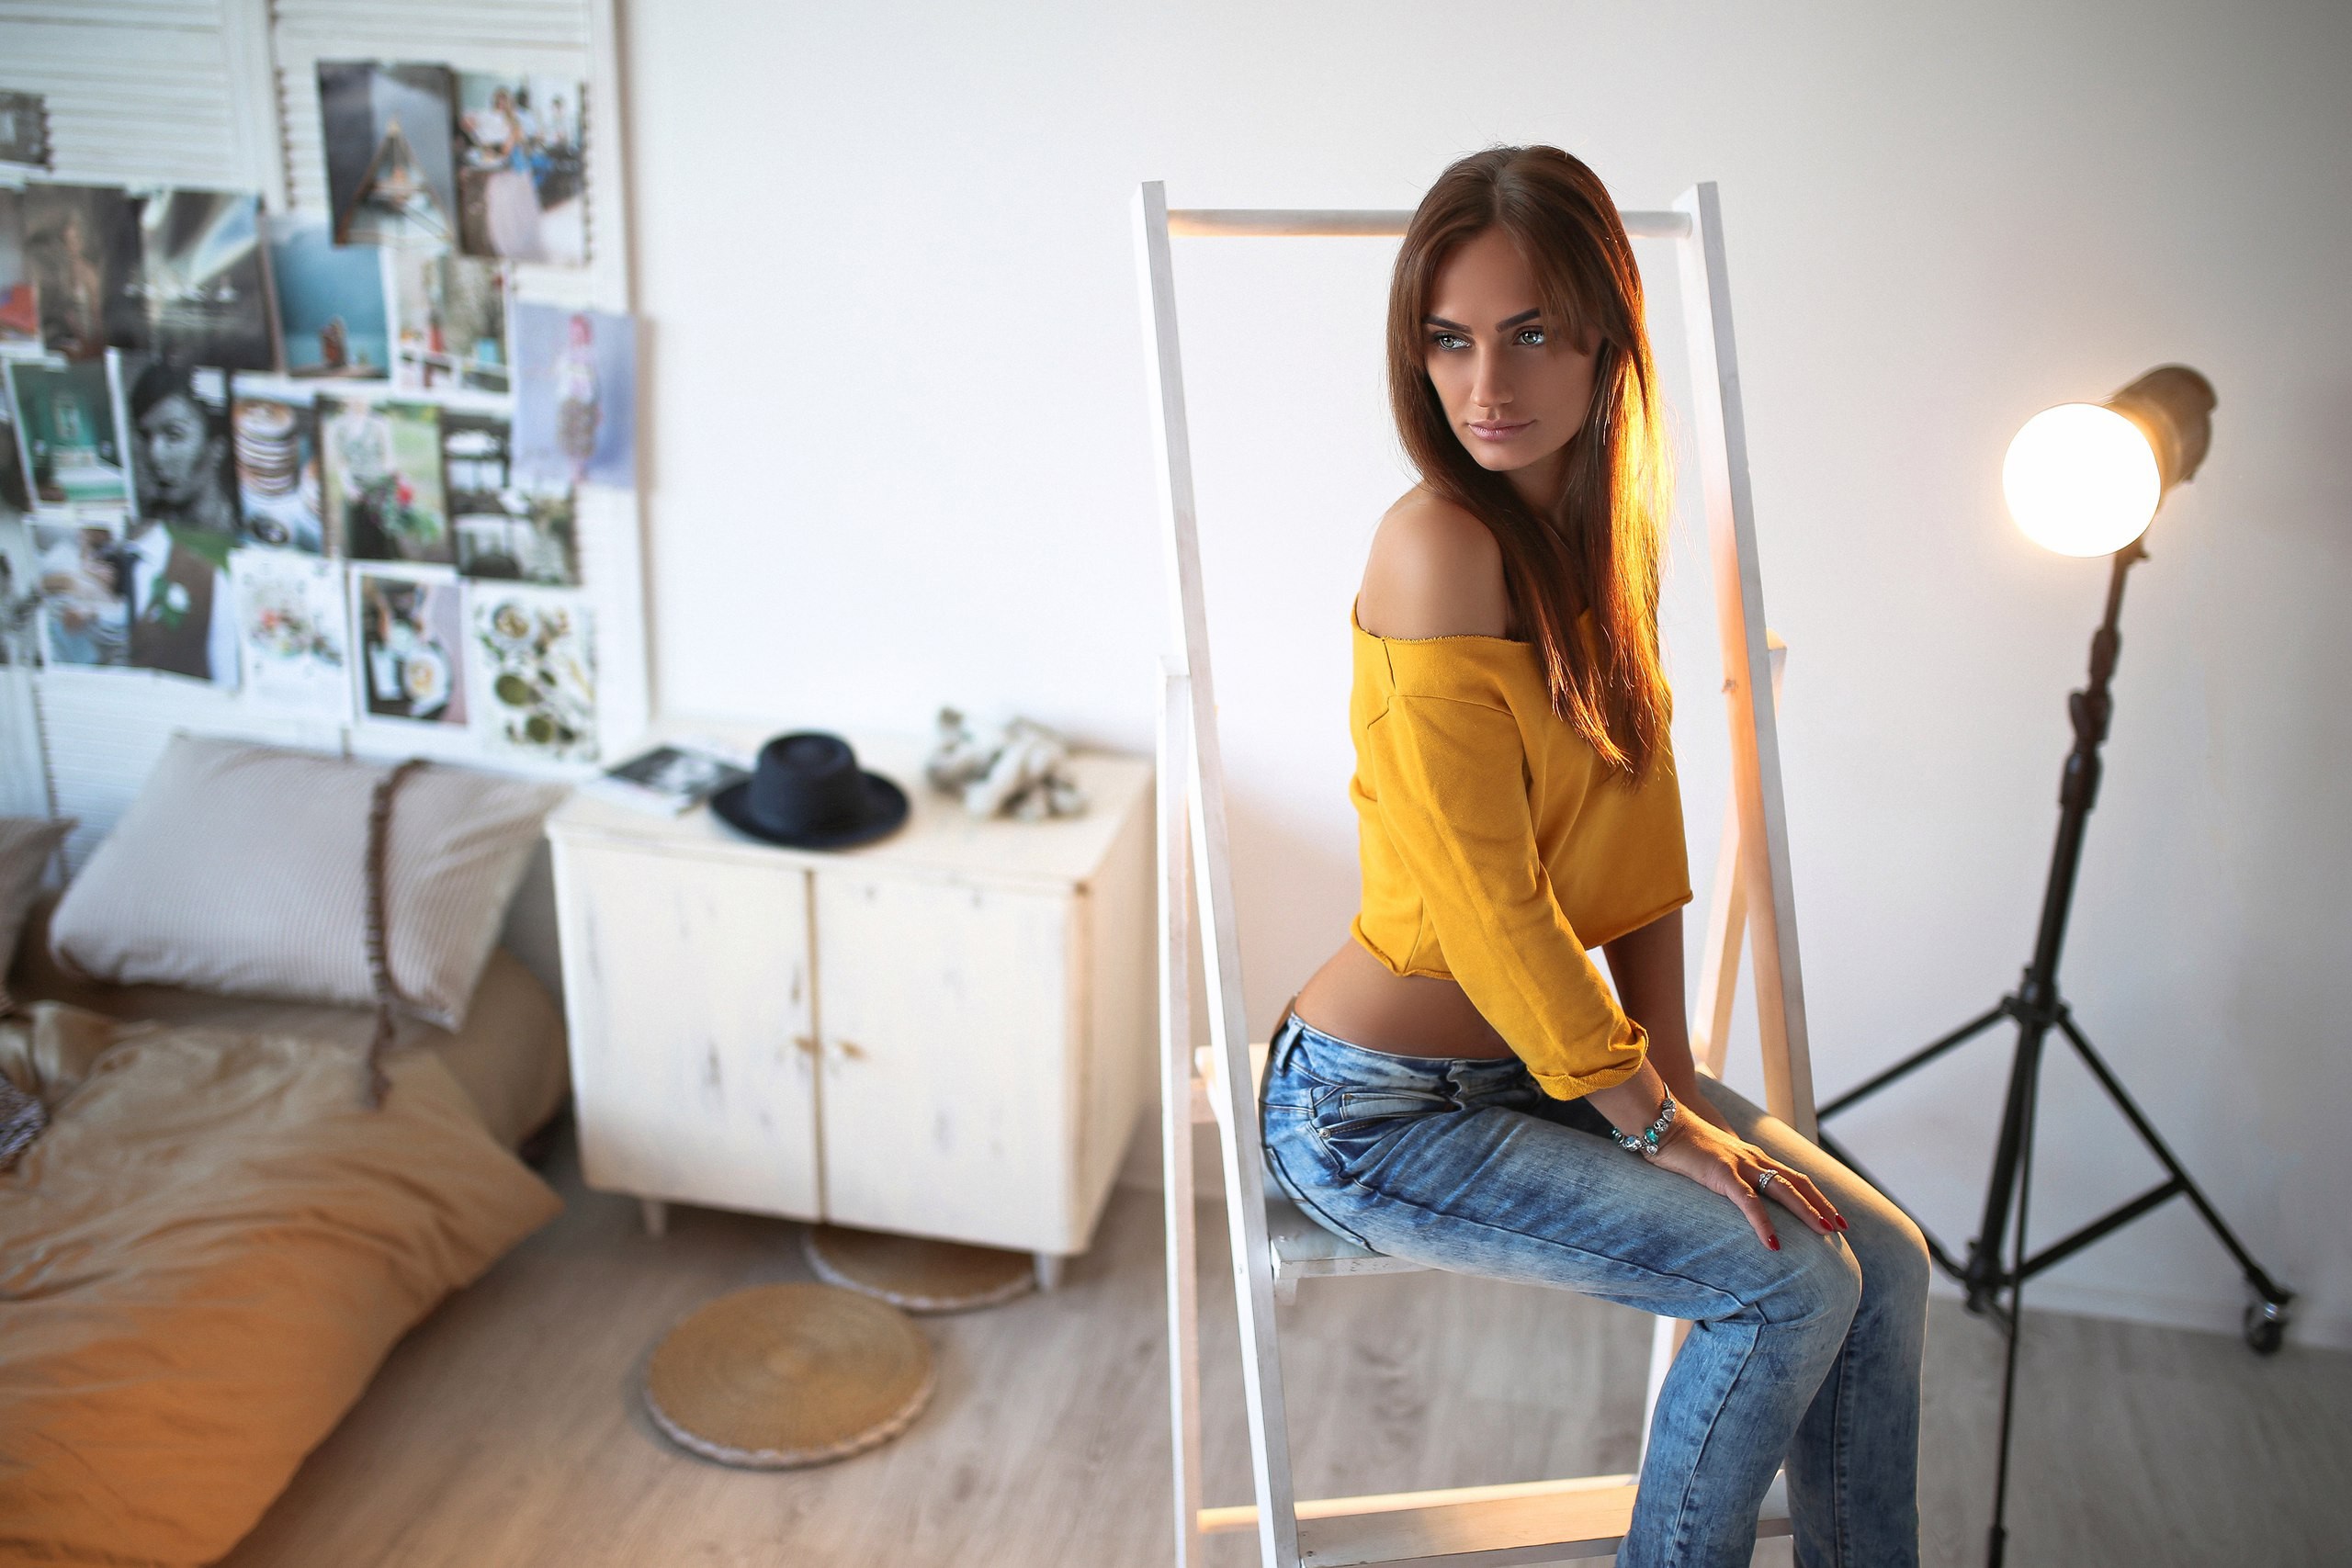 People 2560x1707 Aniuta Minailova women tanned portrait sitting belly looking away room red nails pants jeans